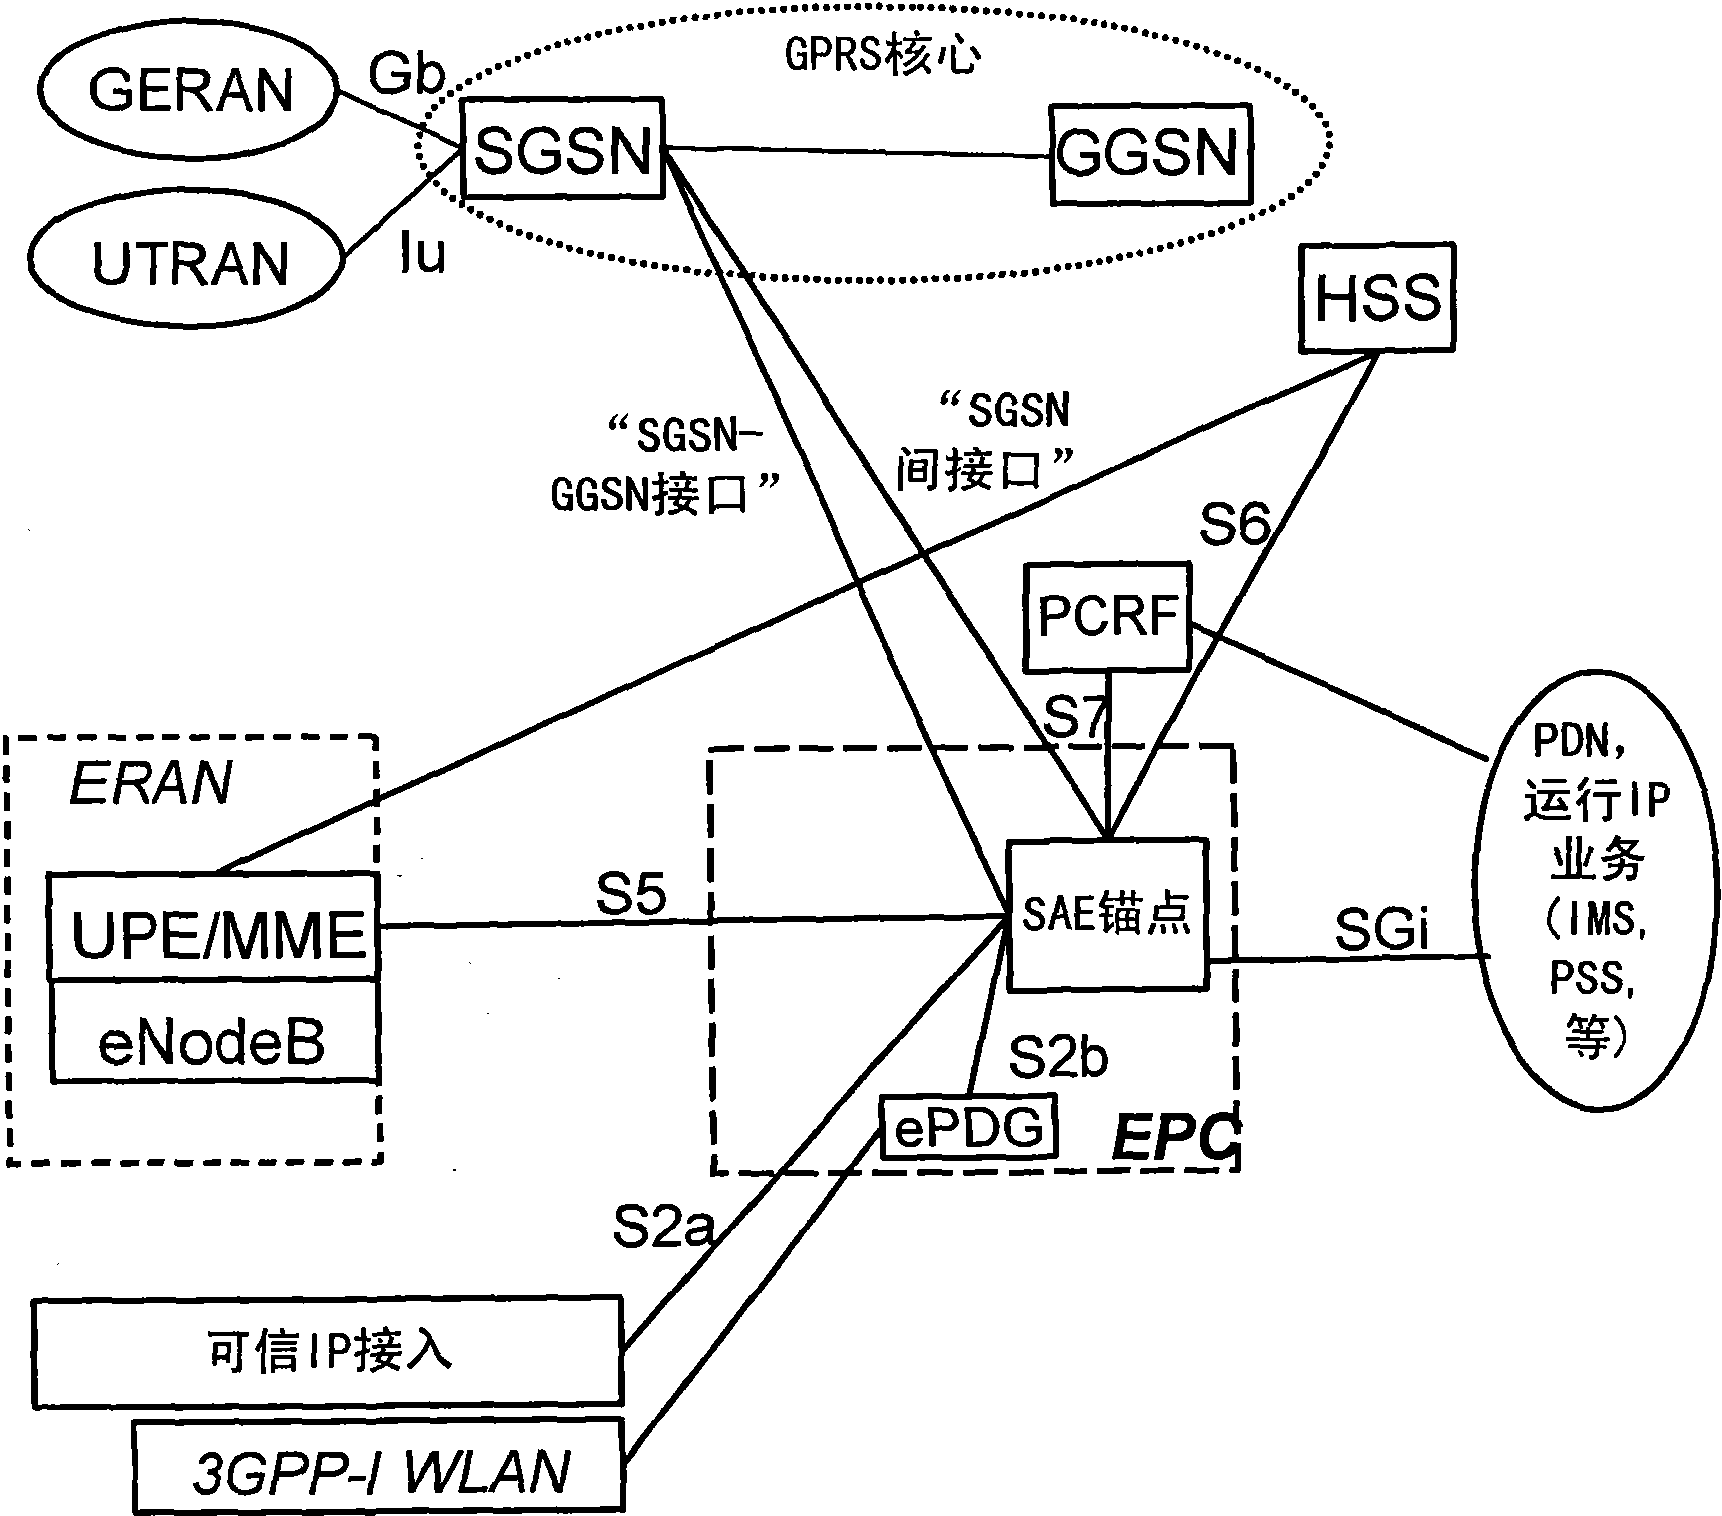 Method and apparatus for preparing connection transfer between an ip based communication system (lte/sae) and a pdp context based communication system (umts/gprs)